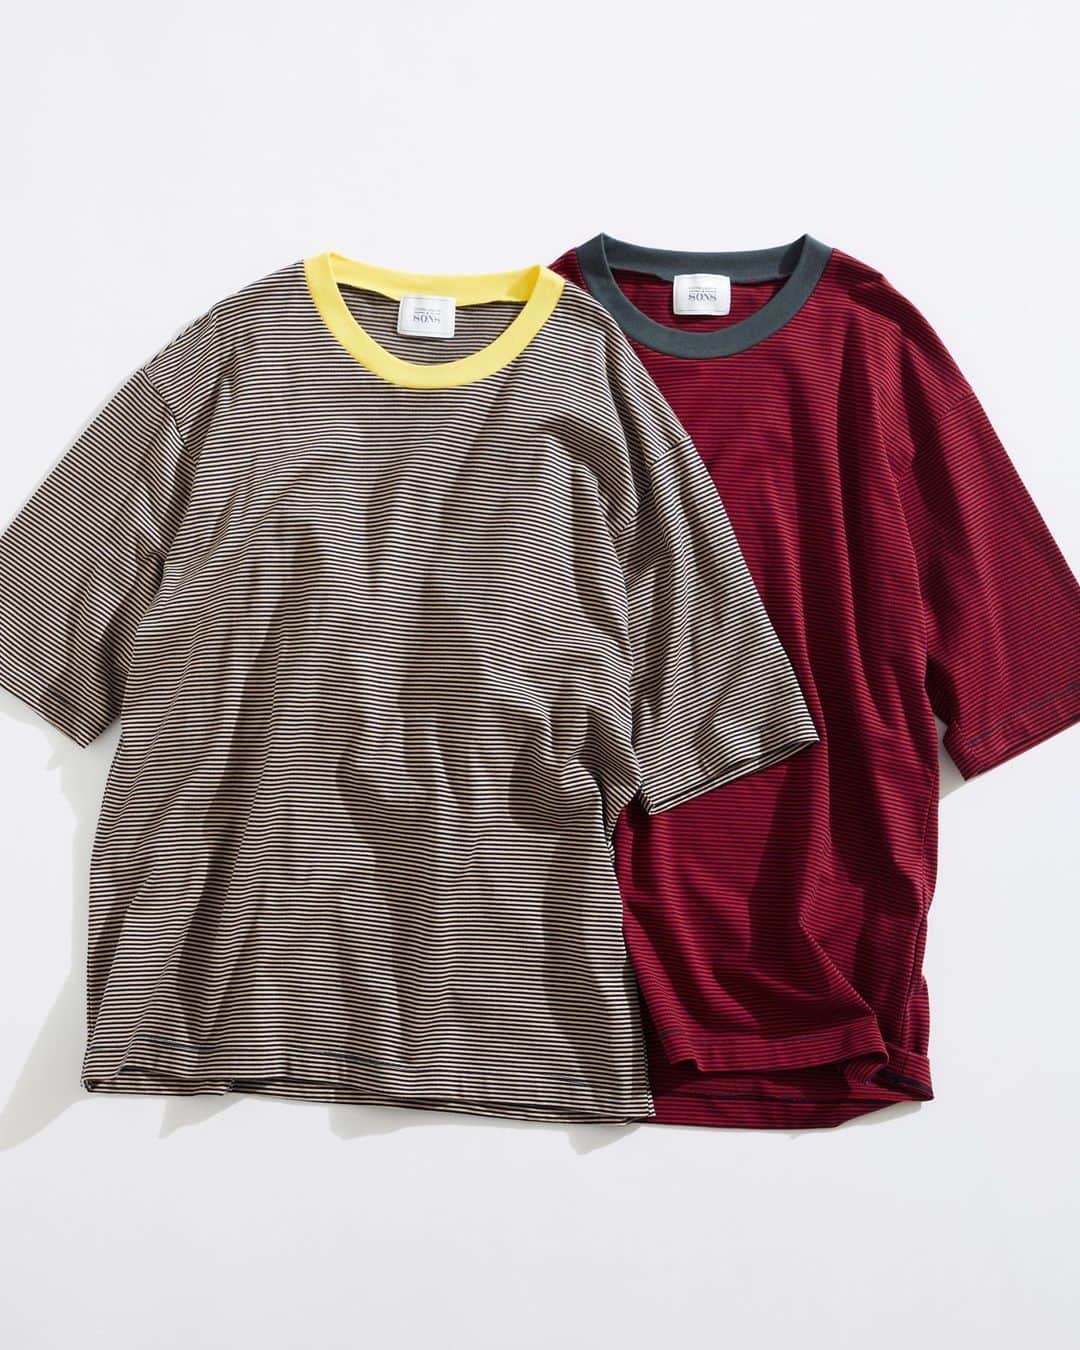 UNITED ARROWS & SONSさんのインスタグラム写真 - (UNITED ARROWS & SONSInstagram)「【 New arrival 】 ＜UNITED ARROWS & SONS ＞ アメカジトラッドアイテムをベースに＜sulvam＞の藤田氏のムードがプラスされたラインナップ。 ダブルポケットを配したオンブレチェック柄のオープンカラーシャツ。特に襟の開きやカッティングに最注力した特有のパターンが特徴です。 ラグラン切り替えの配色が印象的な7分袖のベースボールTシャツは、ソフトで上質なコットン素材を使用し、チノやワークパンツはもちろんスラックスに合わせてもバランスのいい一着に仕上がっています。 襟とボディの配色がポイントのボーダーリンガーTシャツは、1枚着でもバランスがよい5分袖に近い長めの袖丈、ゆったりとしたシルエットが特徴です。  A lineup based on American casual trad items with Mr. Fujita's mood of <sulvam> added. Open collar shirt with ombre check pattern and double pockets. In particular, it features a unique pattern that focuses on opening the collar and cutting. The three-quarter sleeve baseball T-shirt with an impressive raglan color scheme is made of soft and high-quality cotton material, and is well-balanced with chinos, work pants, and slacks. The Border Ringer T-shirt, which features the color scheme of the collar and body, features a long sleeve length that is close to half sleeves and a relaxed silhouette that is well-balanced even when worn alone.  #UnitedArrowsAndSons #UnitedArrows」4月19日 20時19分 - unitedarrowsandsons